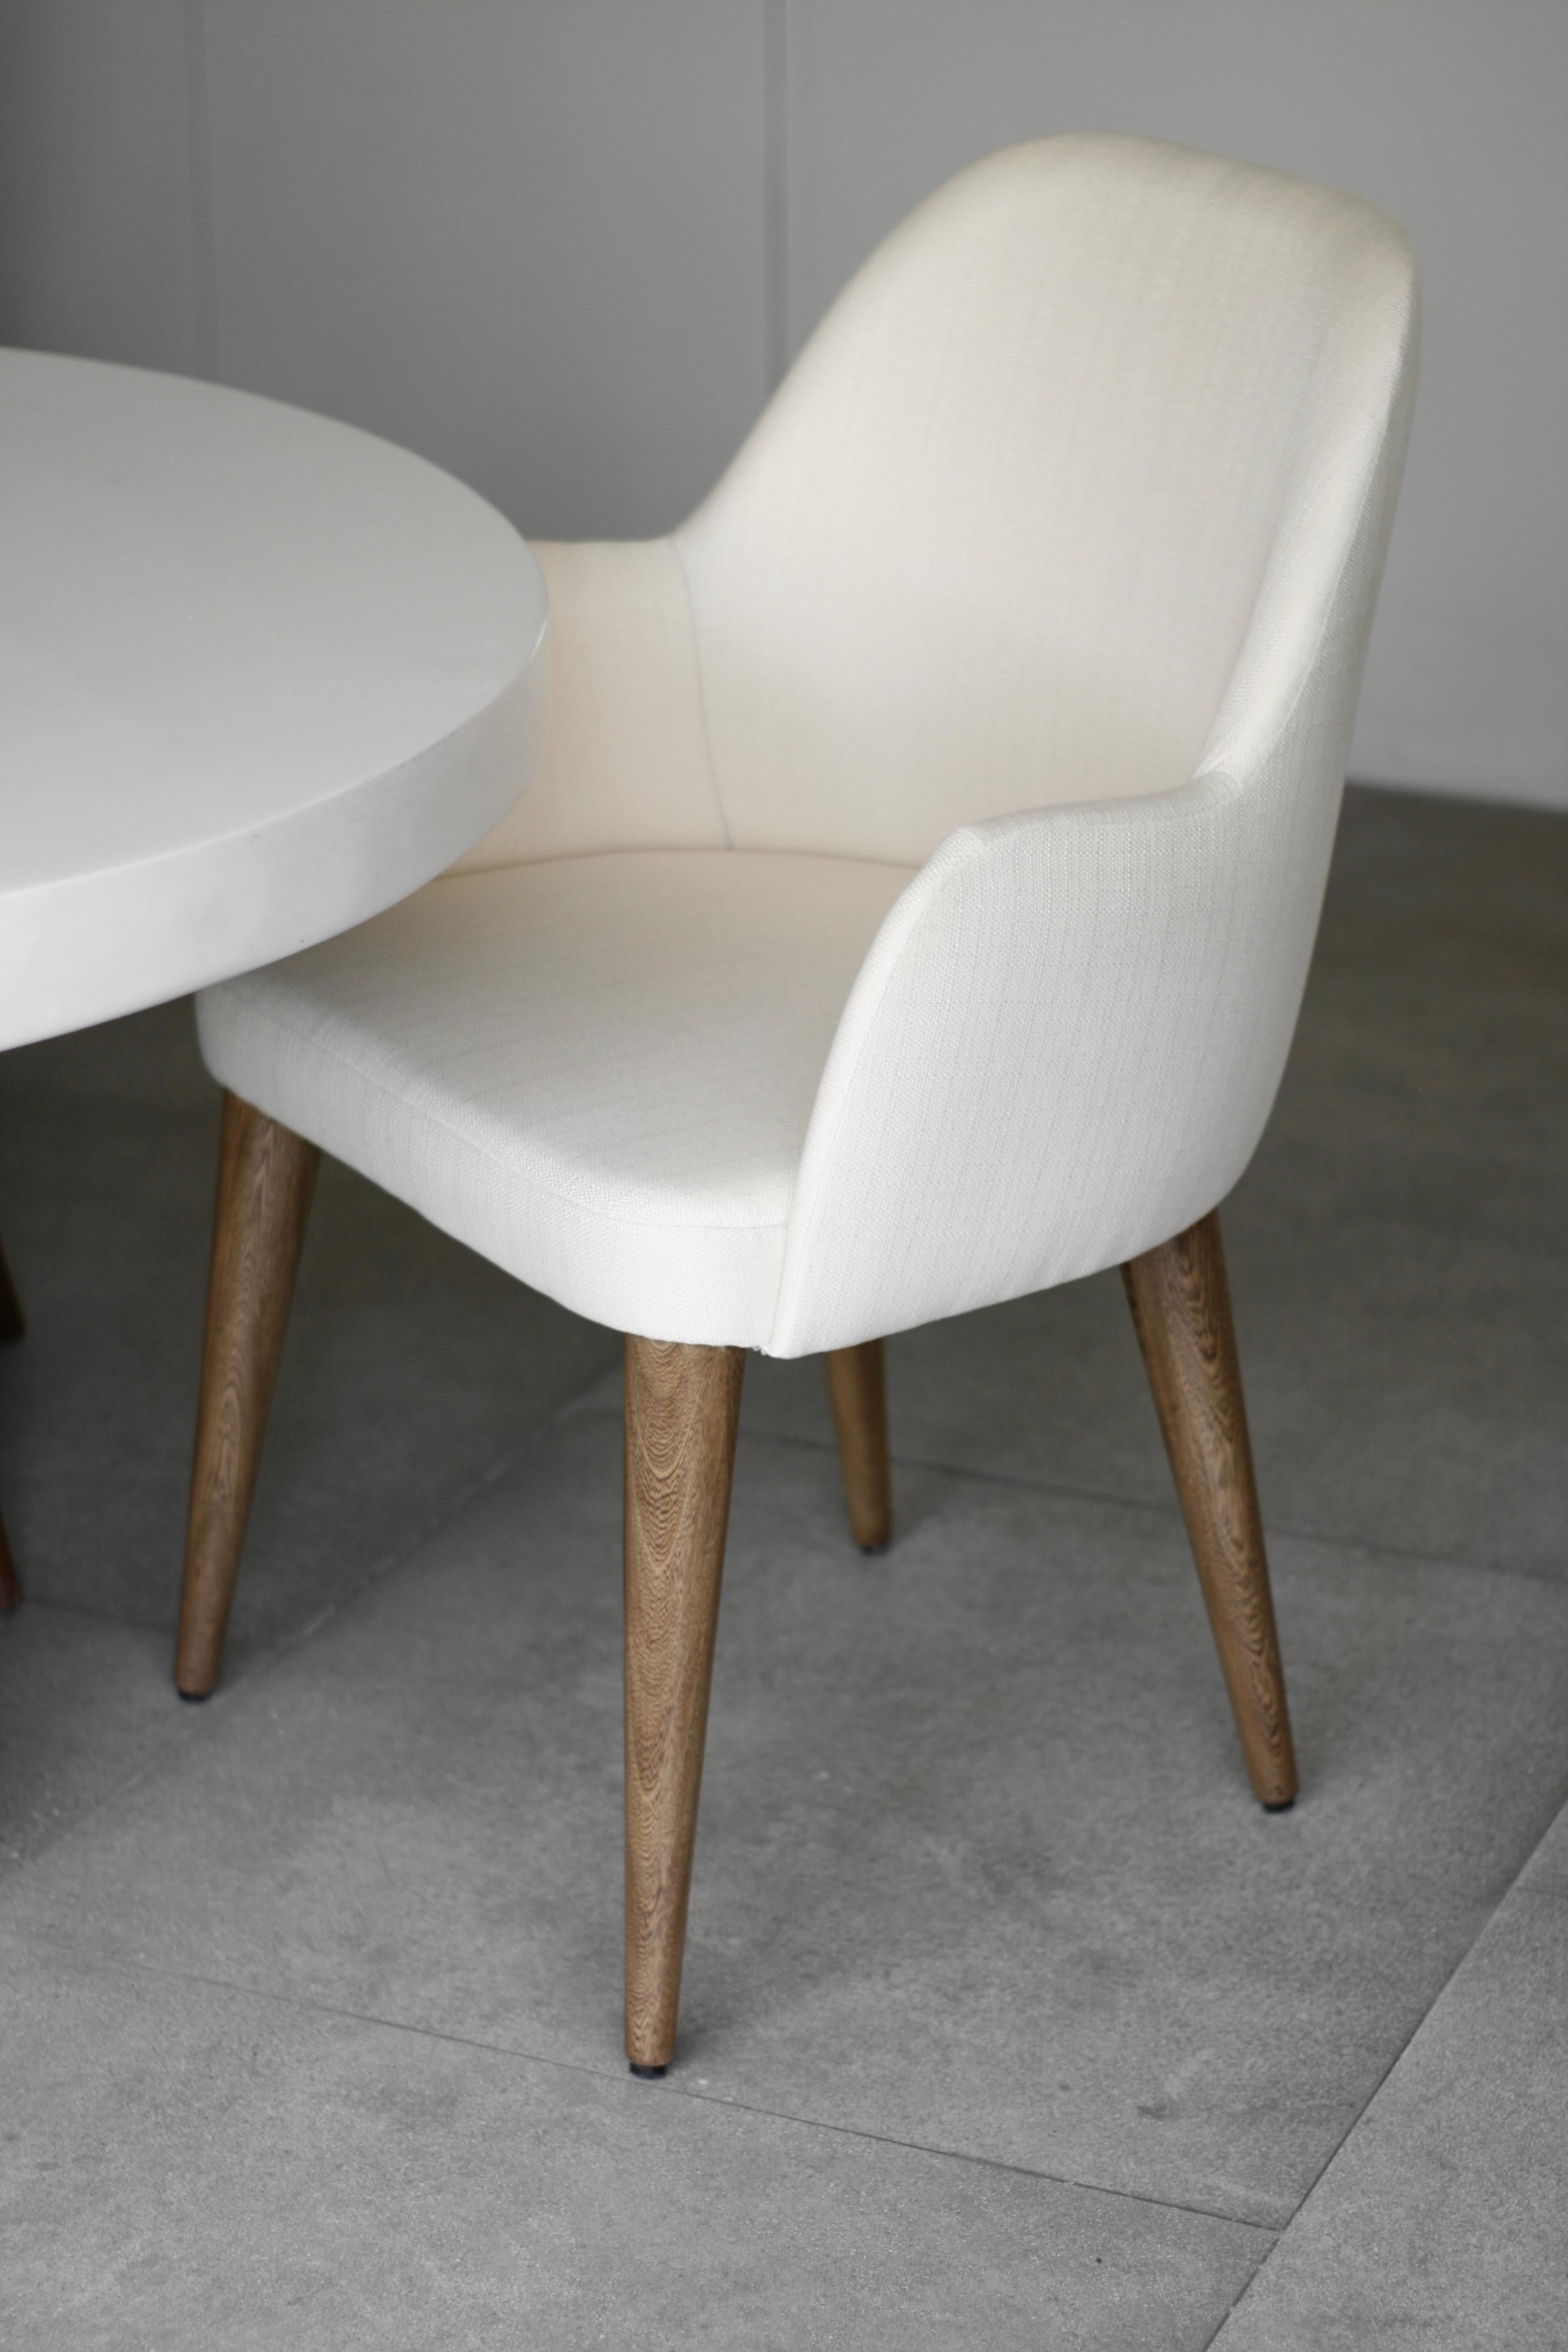 Helsinki collection. Helsinki armchair: simple, elegant, comfortable. Available in oak and walnut base or in custom materials, may be upholstered with variety of fabrics and colors. Also available as an arm chair and stool. 

Our clients´ favorite